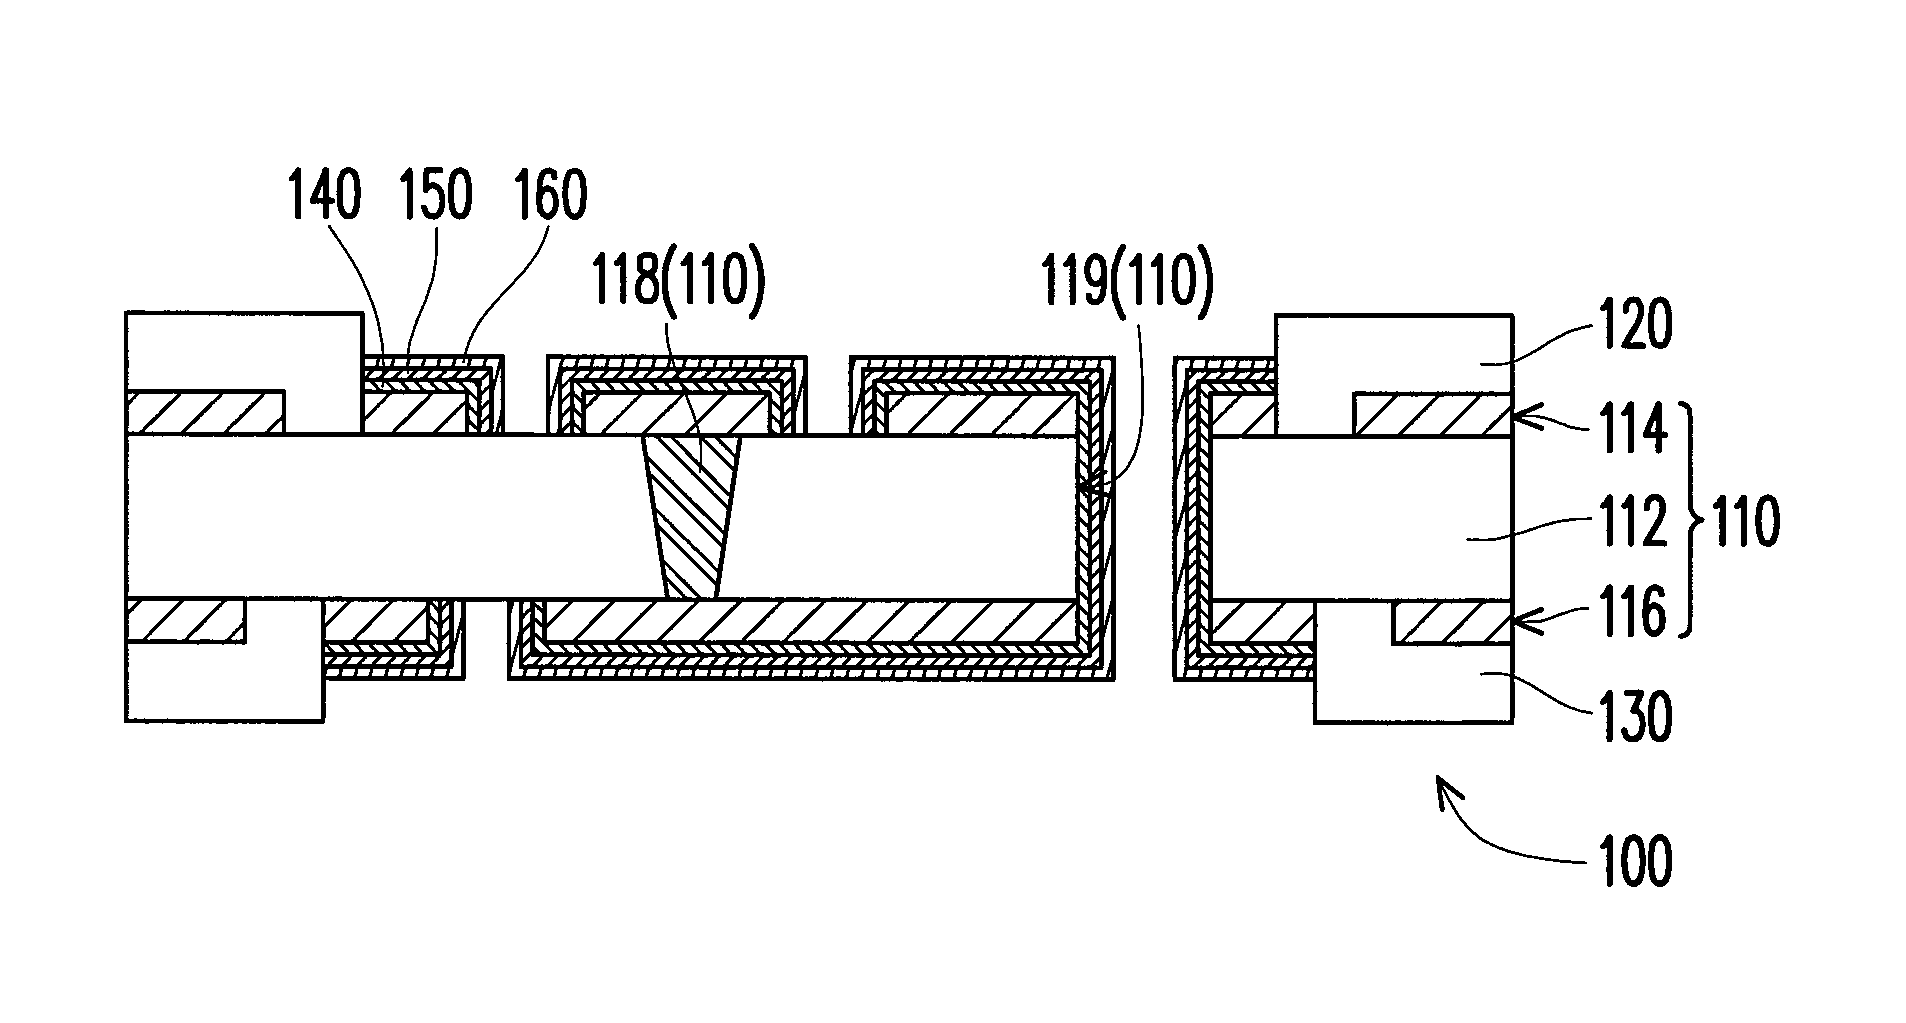 Manufacturing method of substrate structure